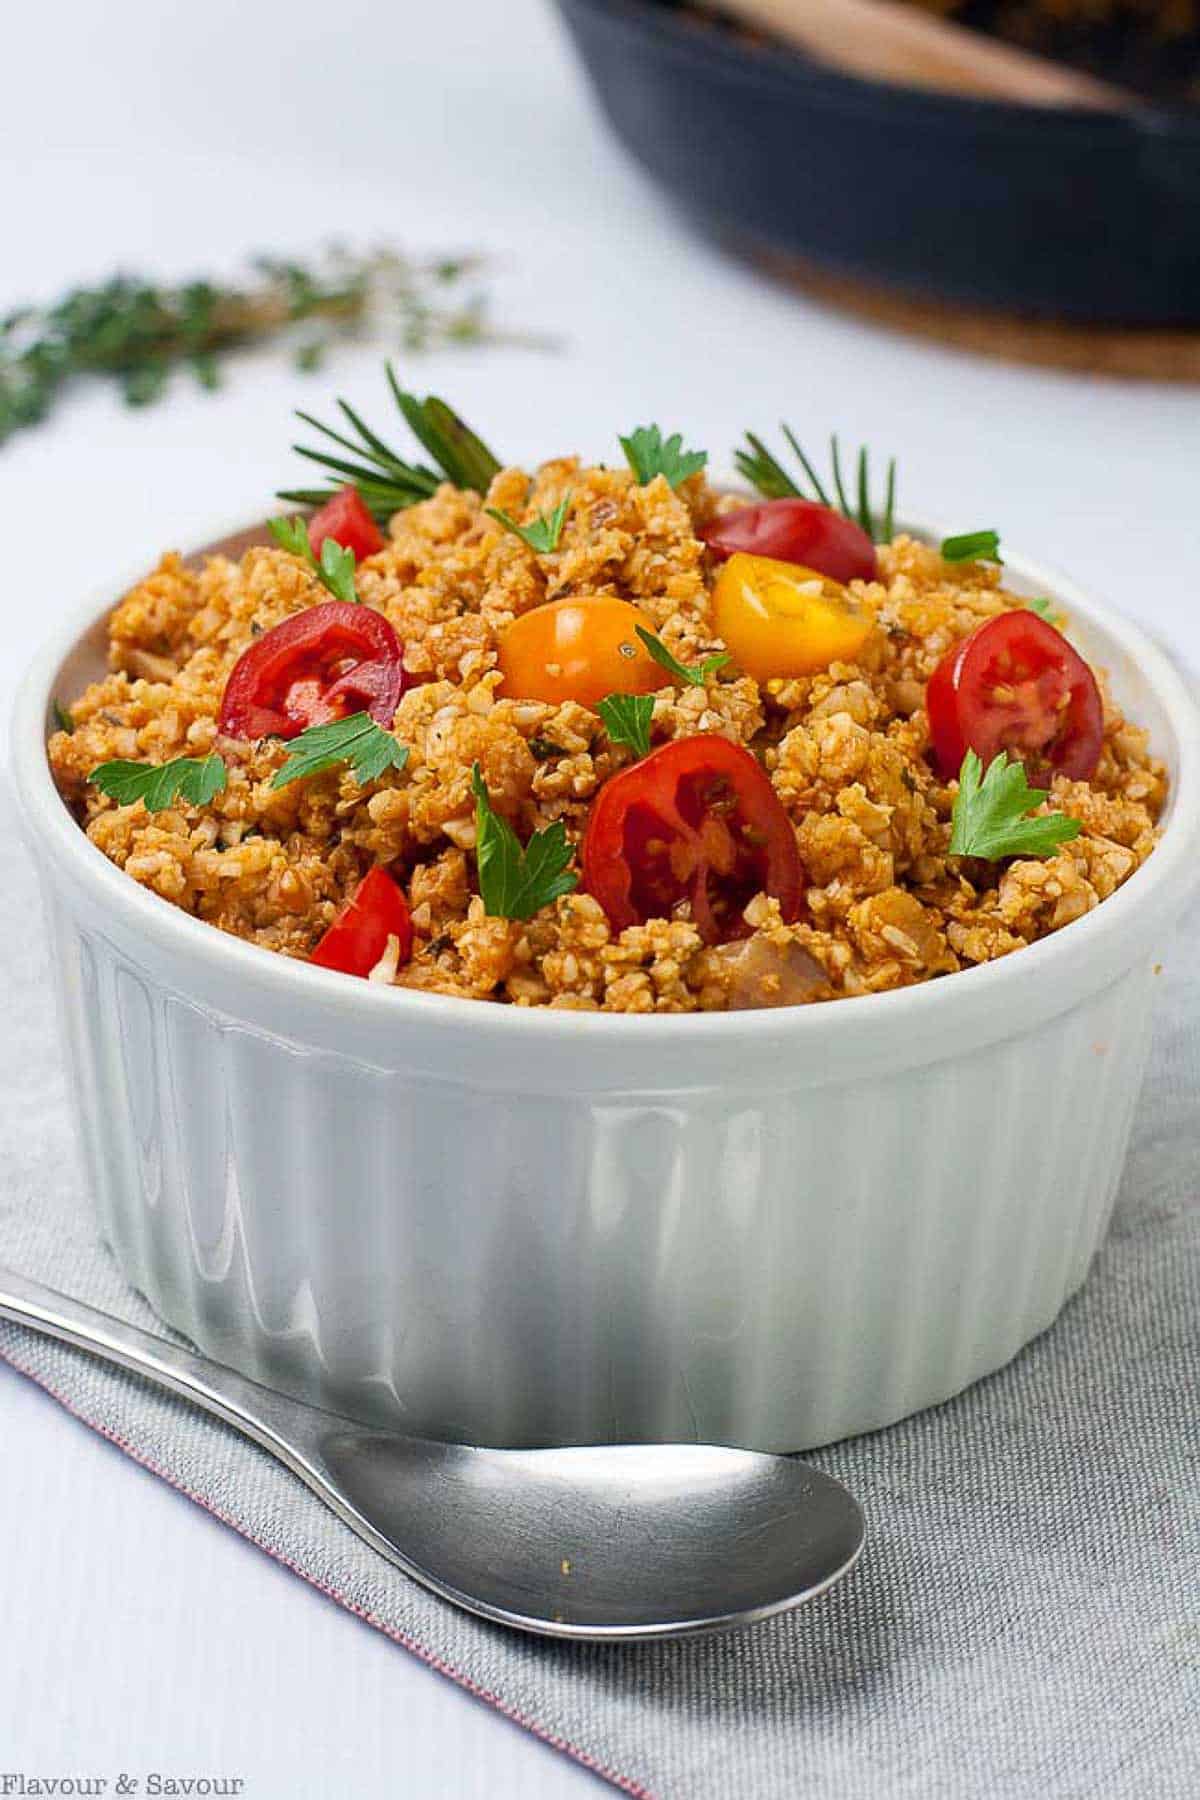 A bowl of Spanish-style cauliflower rice with cherry tomatoes and herbs.